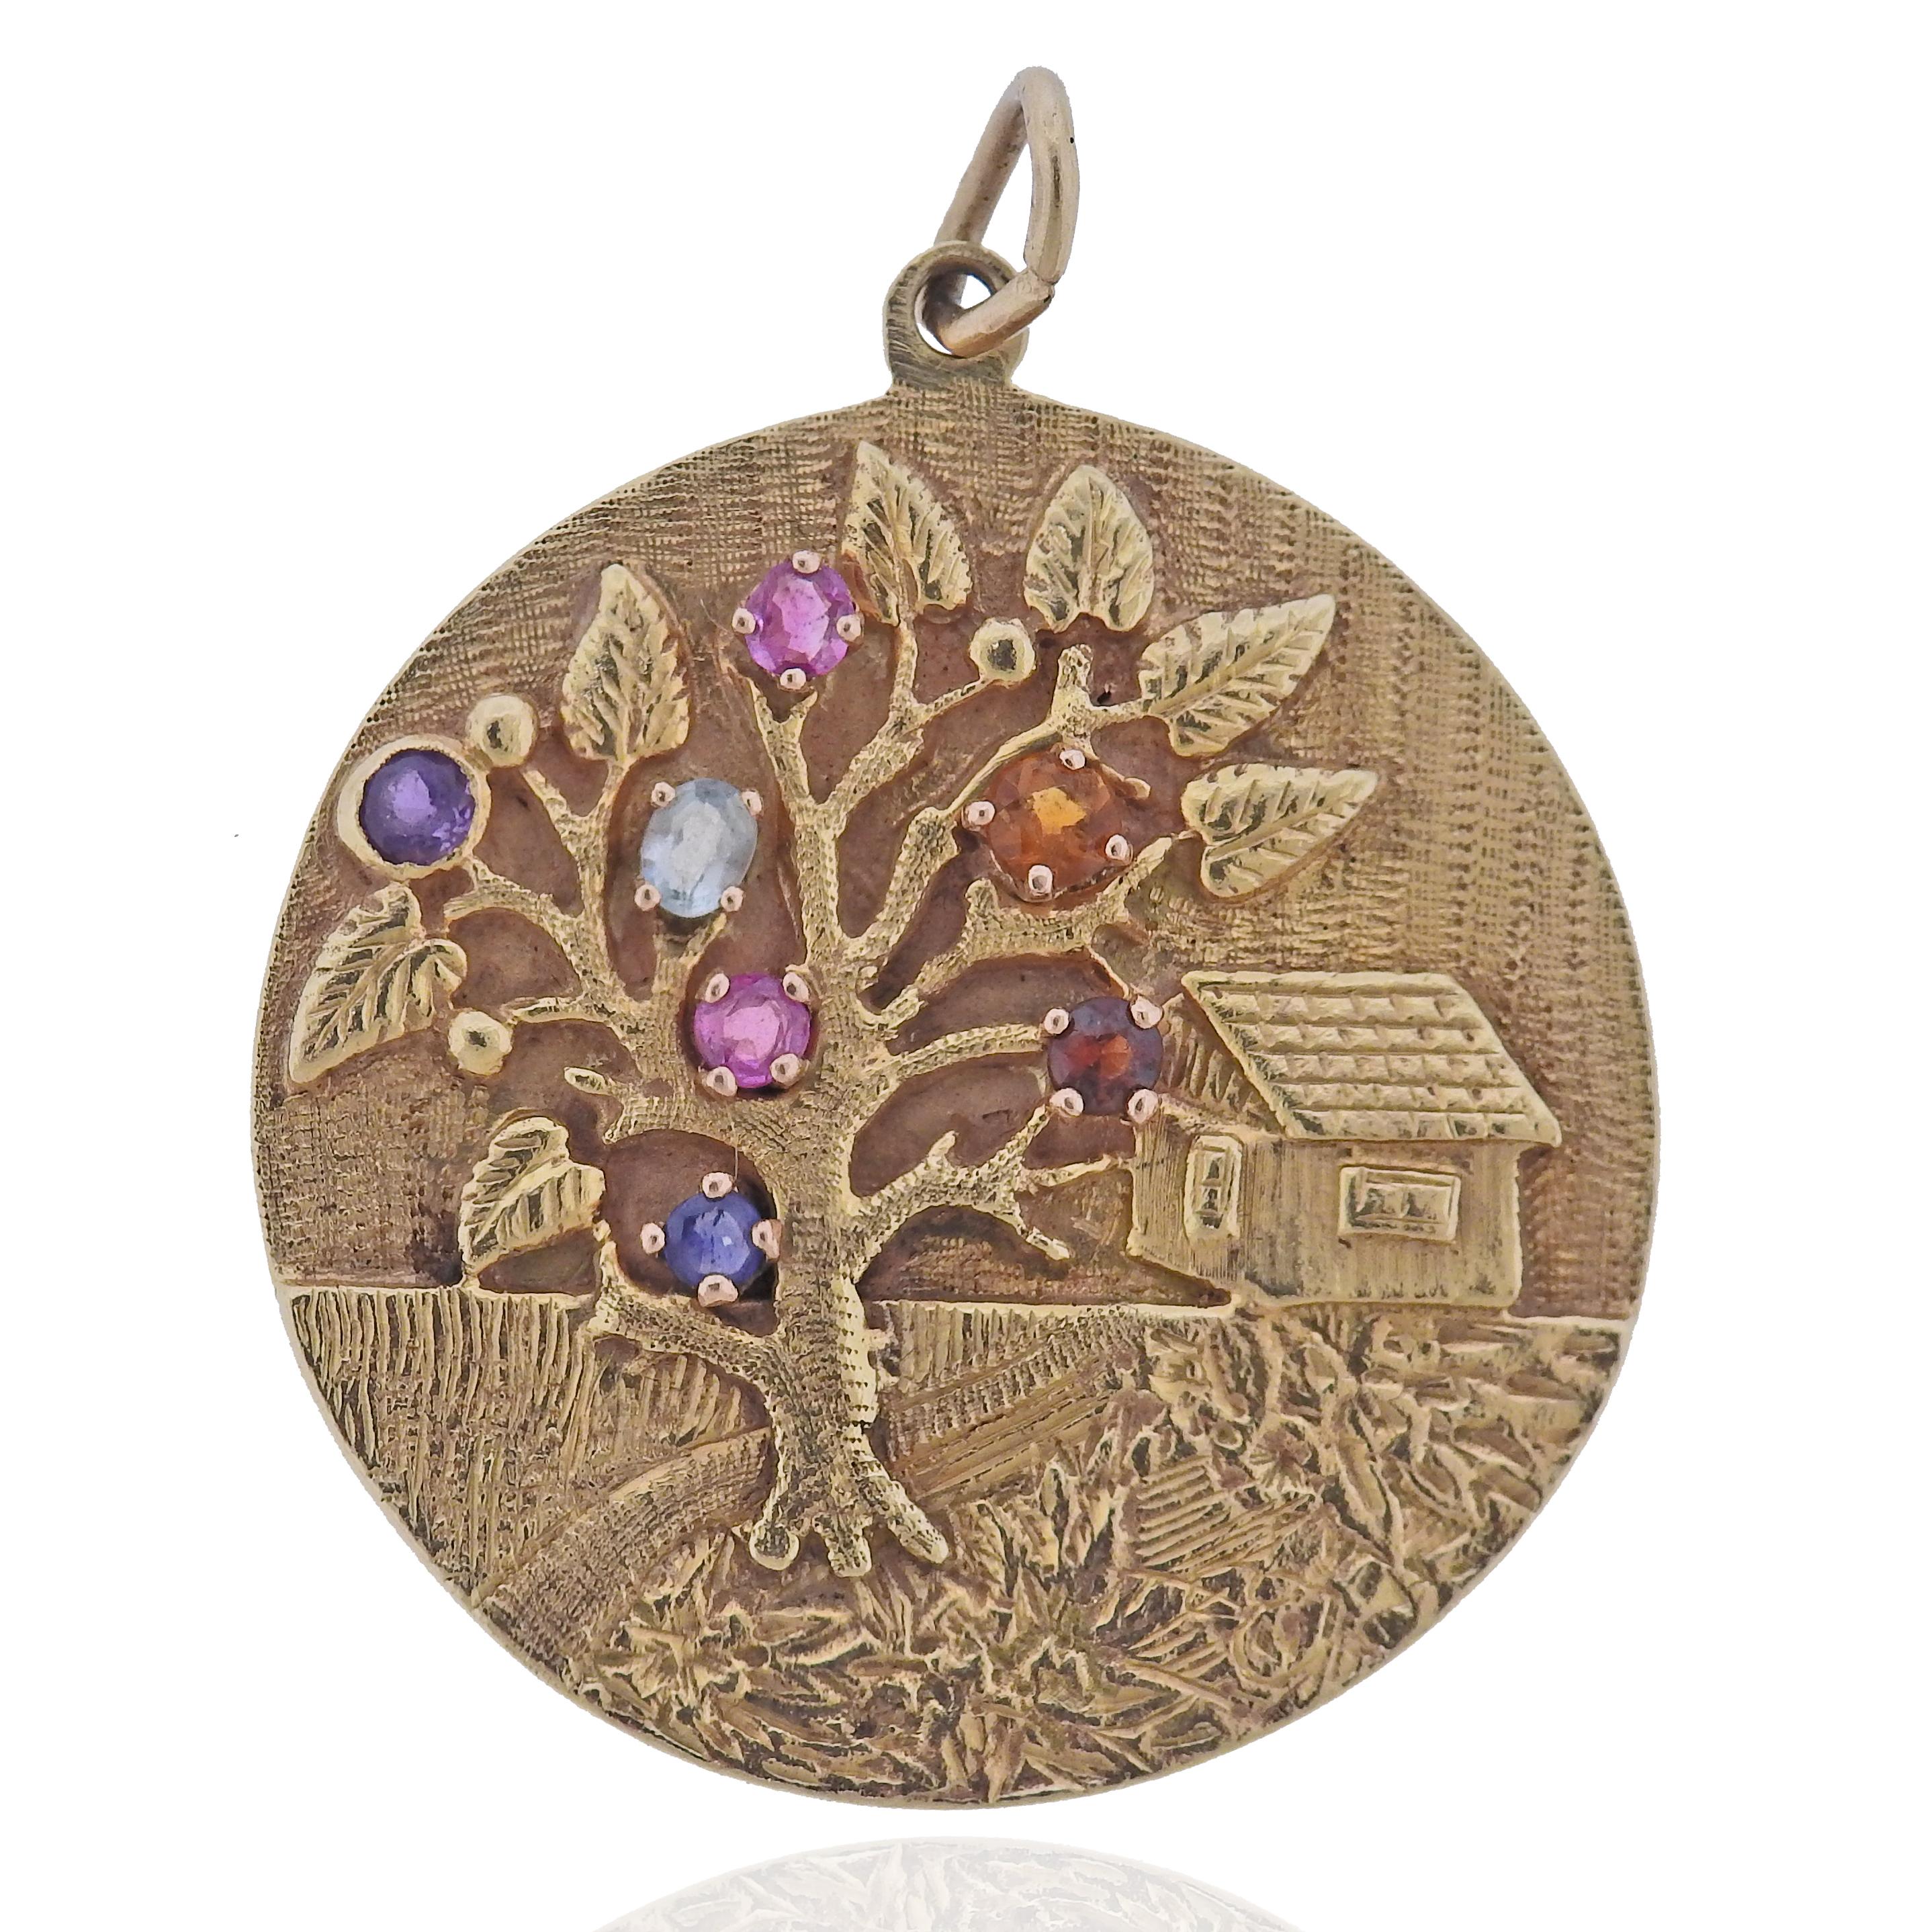 Retro 14k gold medallion pendant charm, with amethyst, sapphire, ruby, citrine, garnet and topaz. Pendant is 38mm in diameter. Marked 14k. Weight 22.4 grams. 